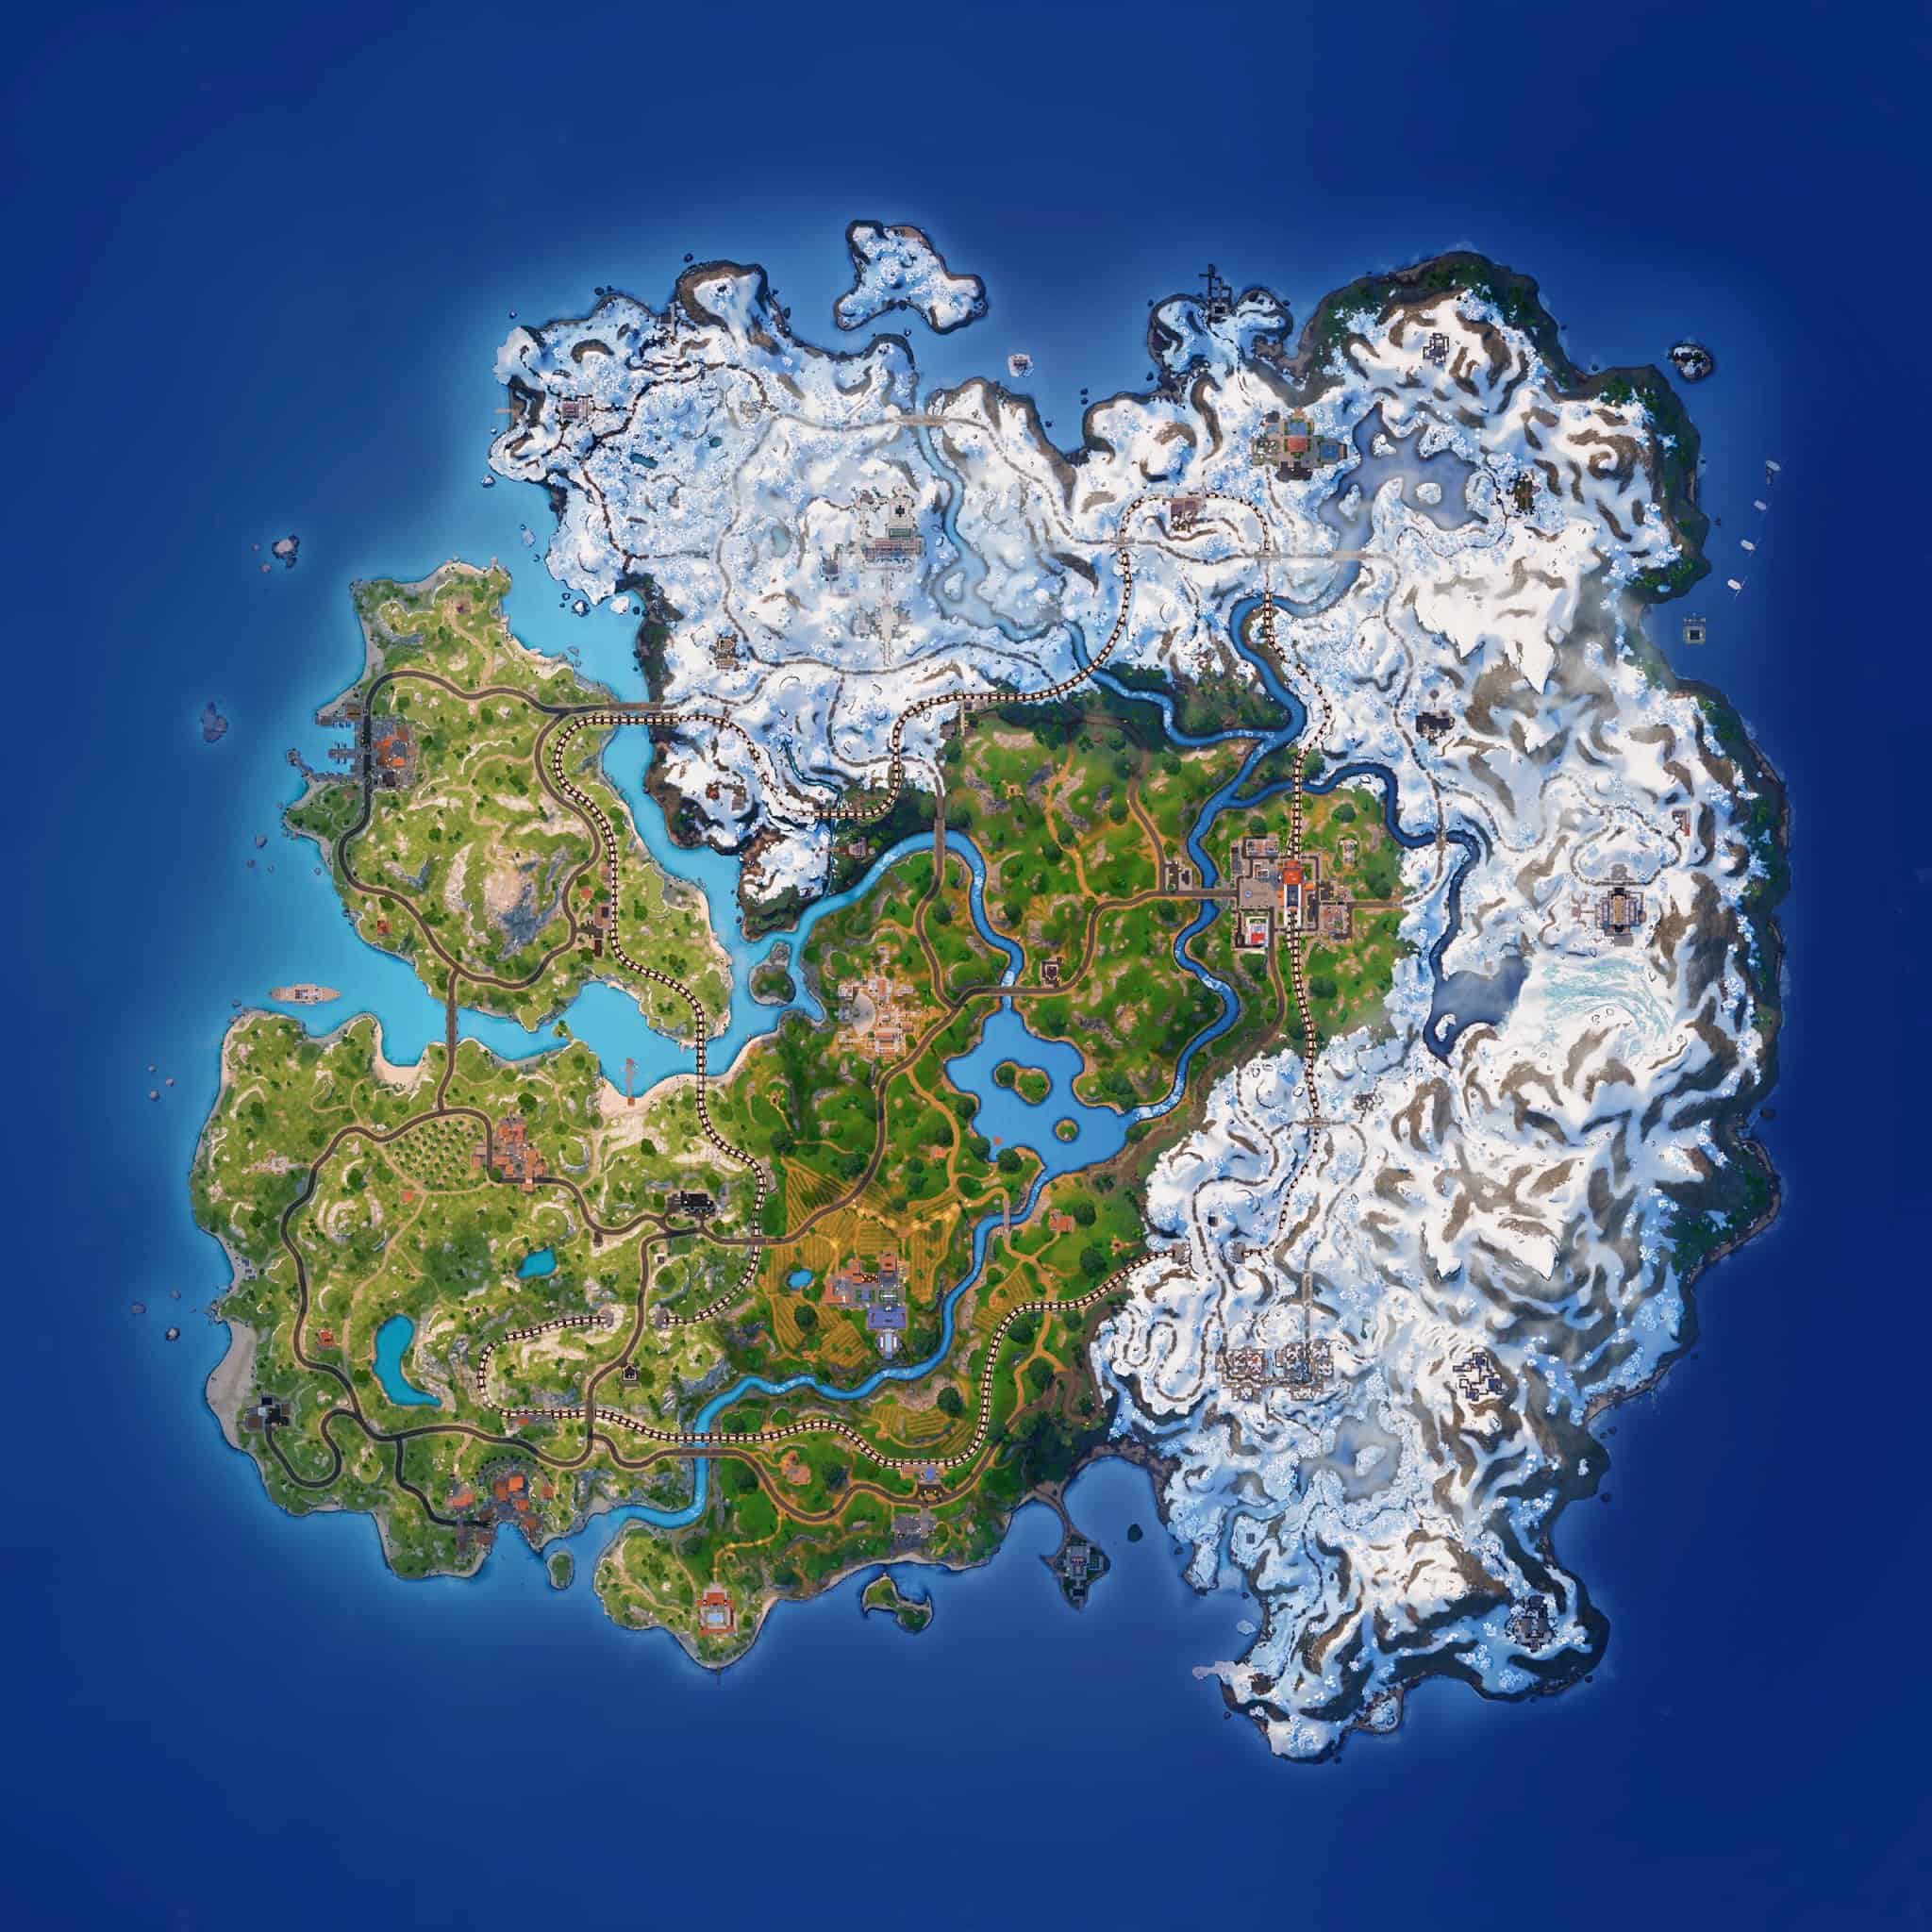 Fortnite Chapter 5 Season 1 map: An un-annotated overhead view of the new Fortnite Chapter 5 Season 1 map.